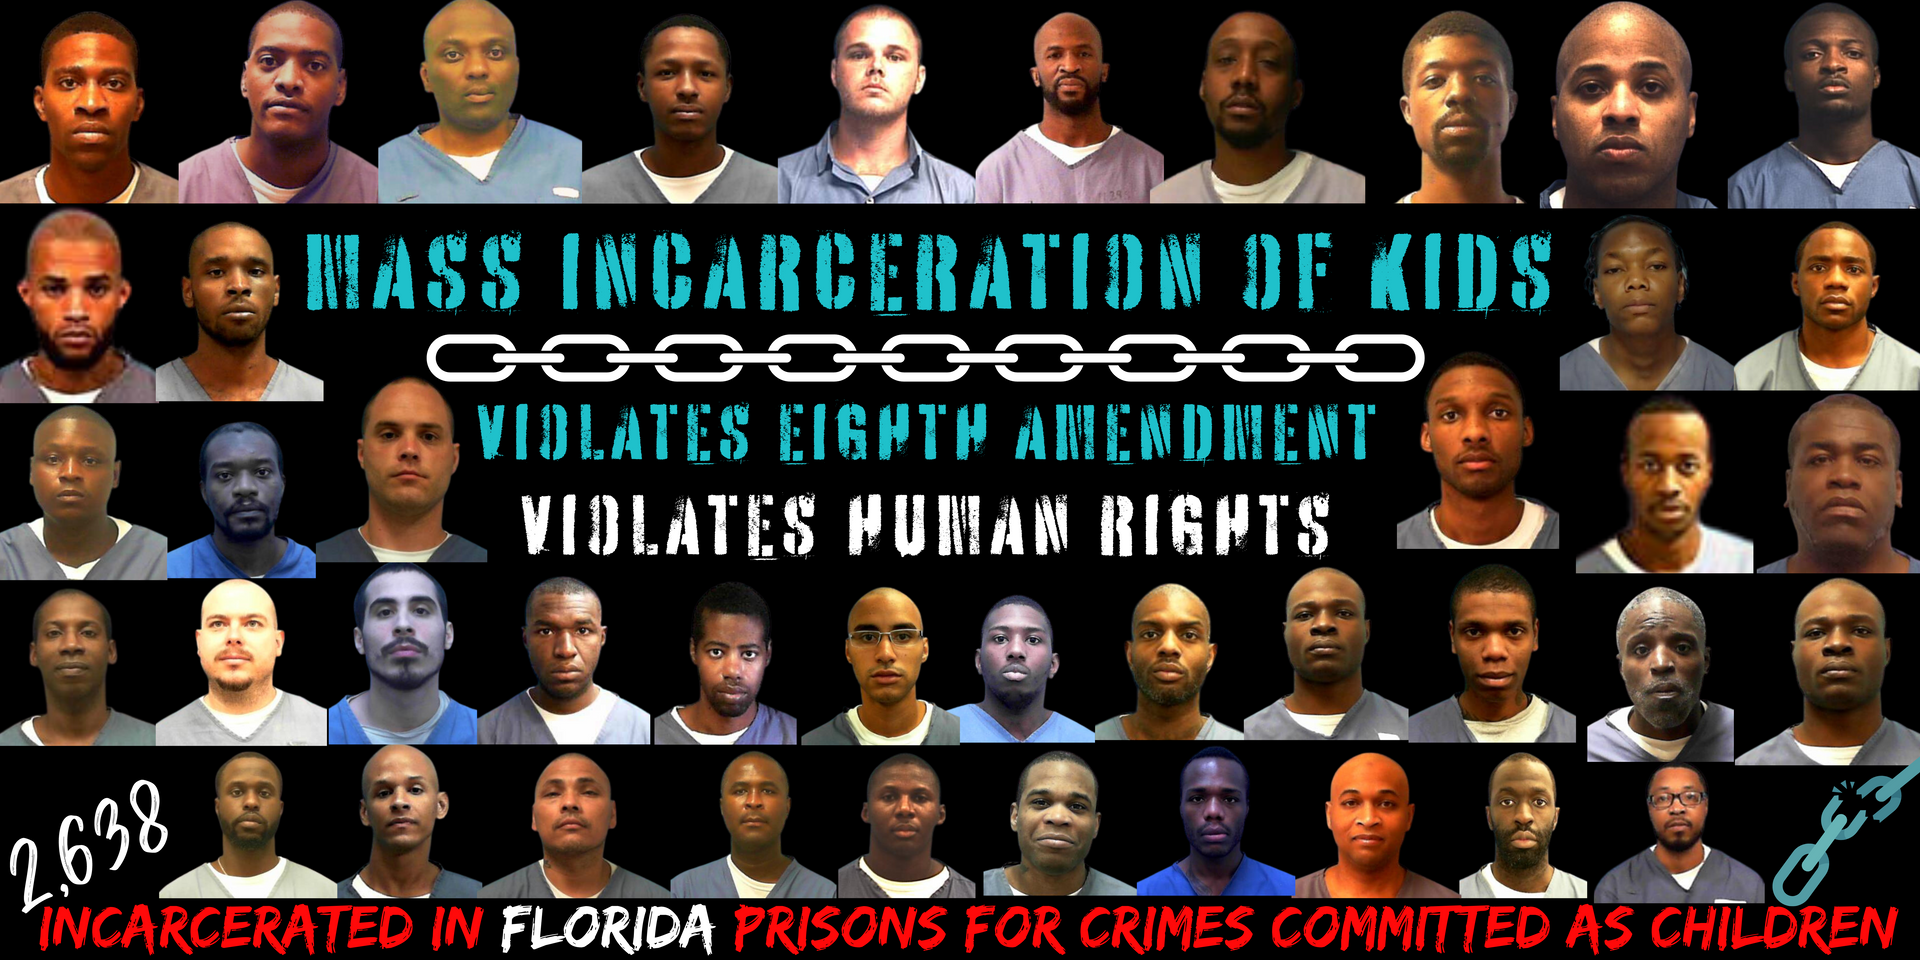 Mass Incarceration of Kids, 2,638 incarcerated in Florida for crimes committed as children. 